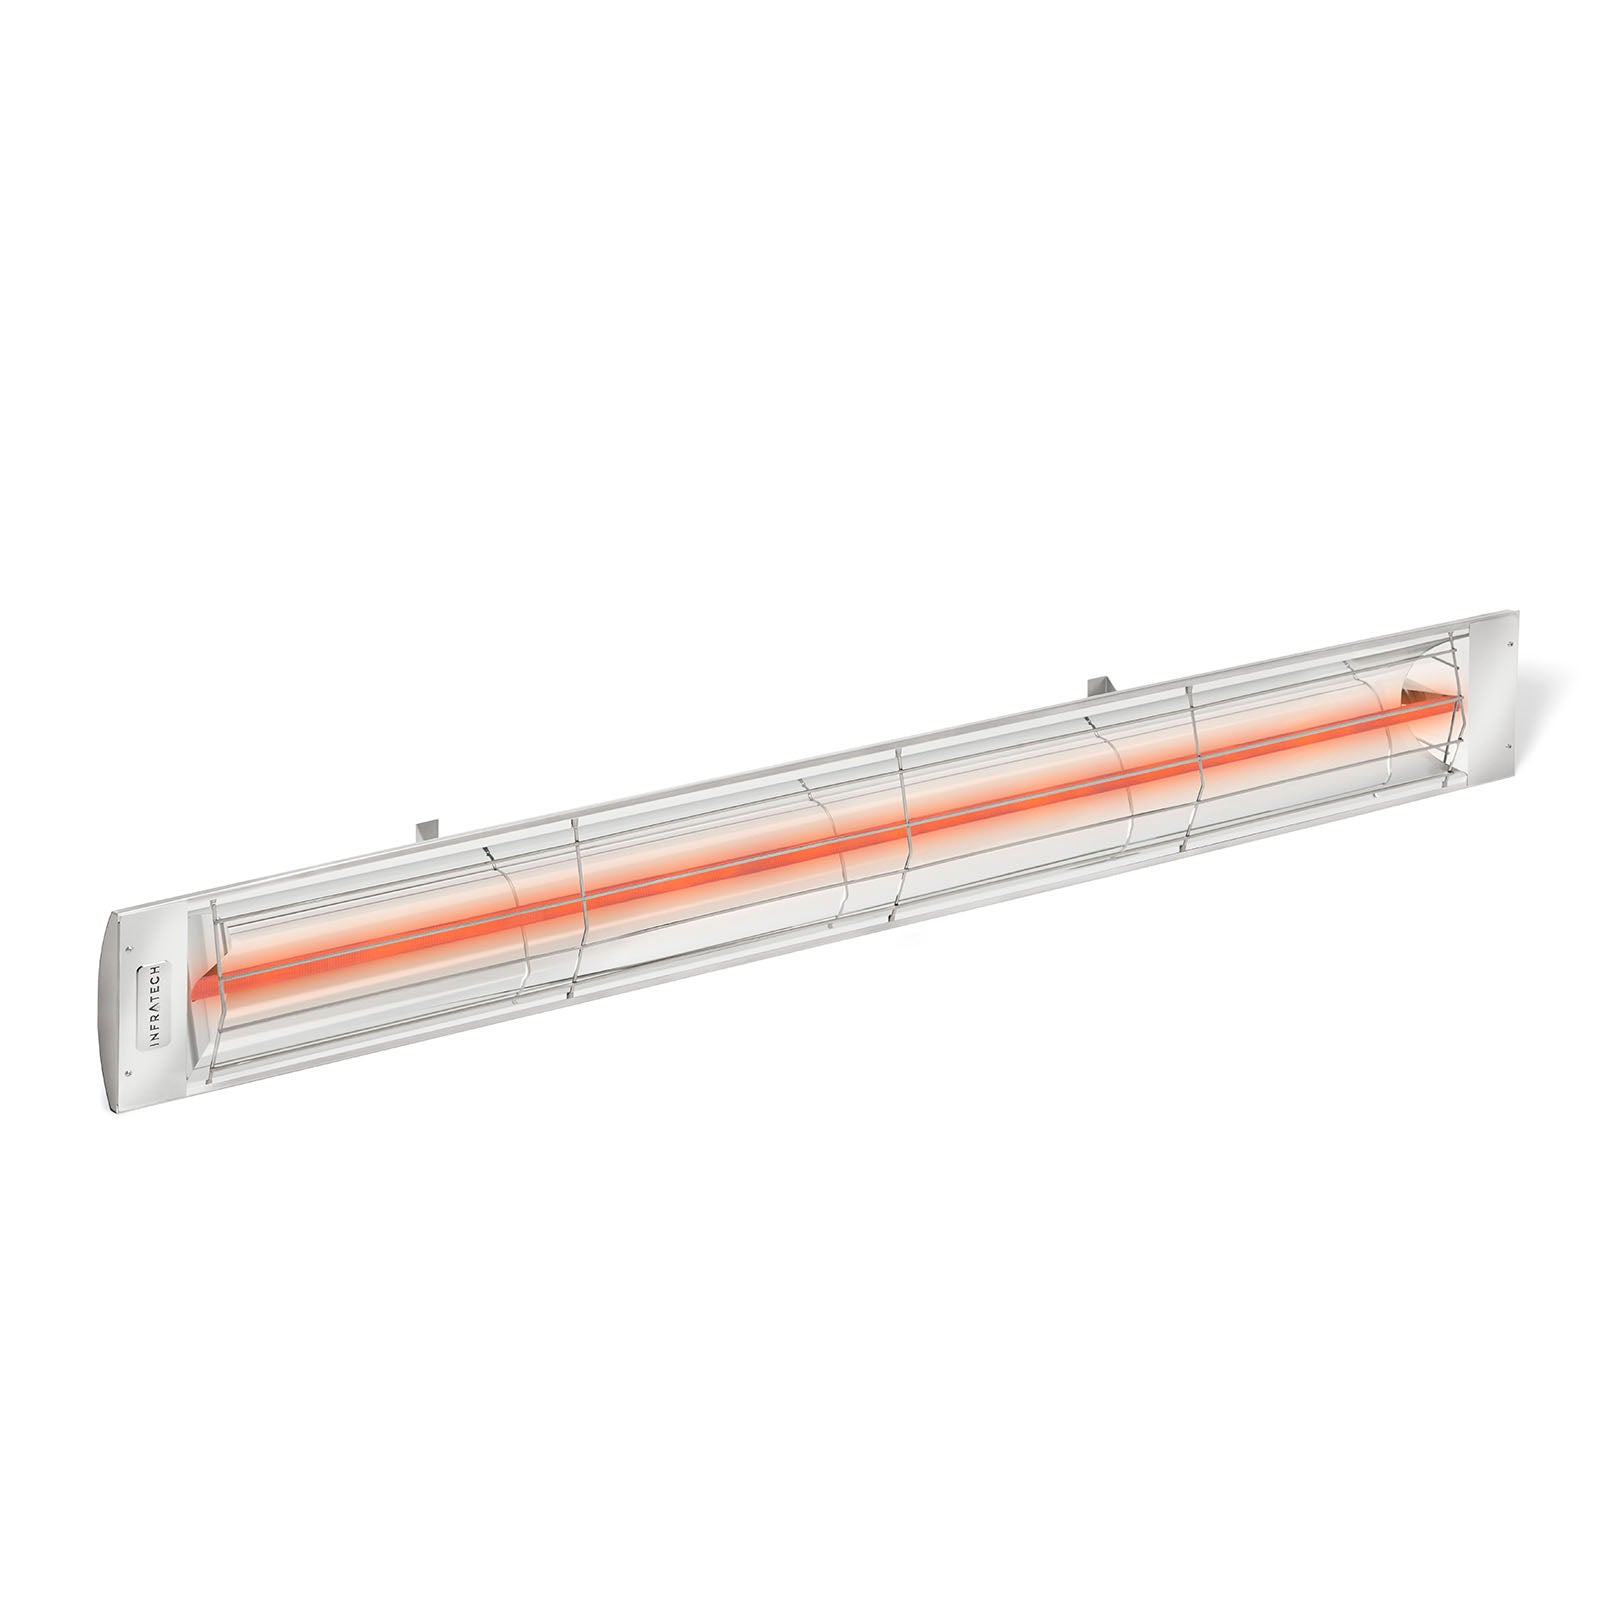 Infratech C40 Single Element 4000W Radiant Heater - Stainless Steel